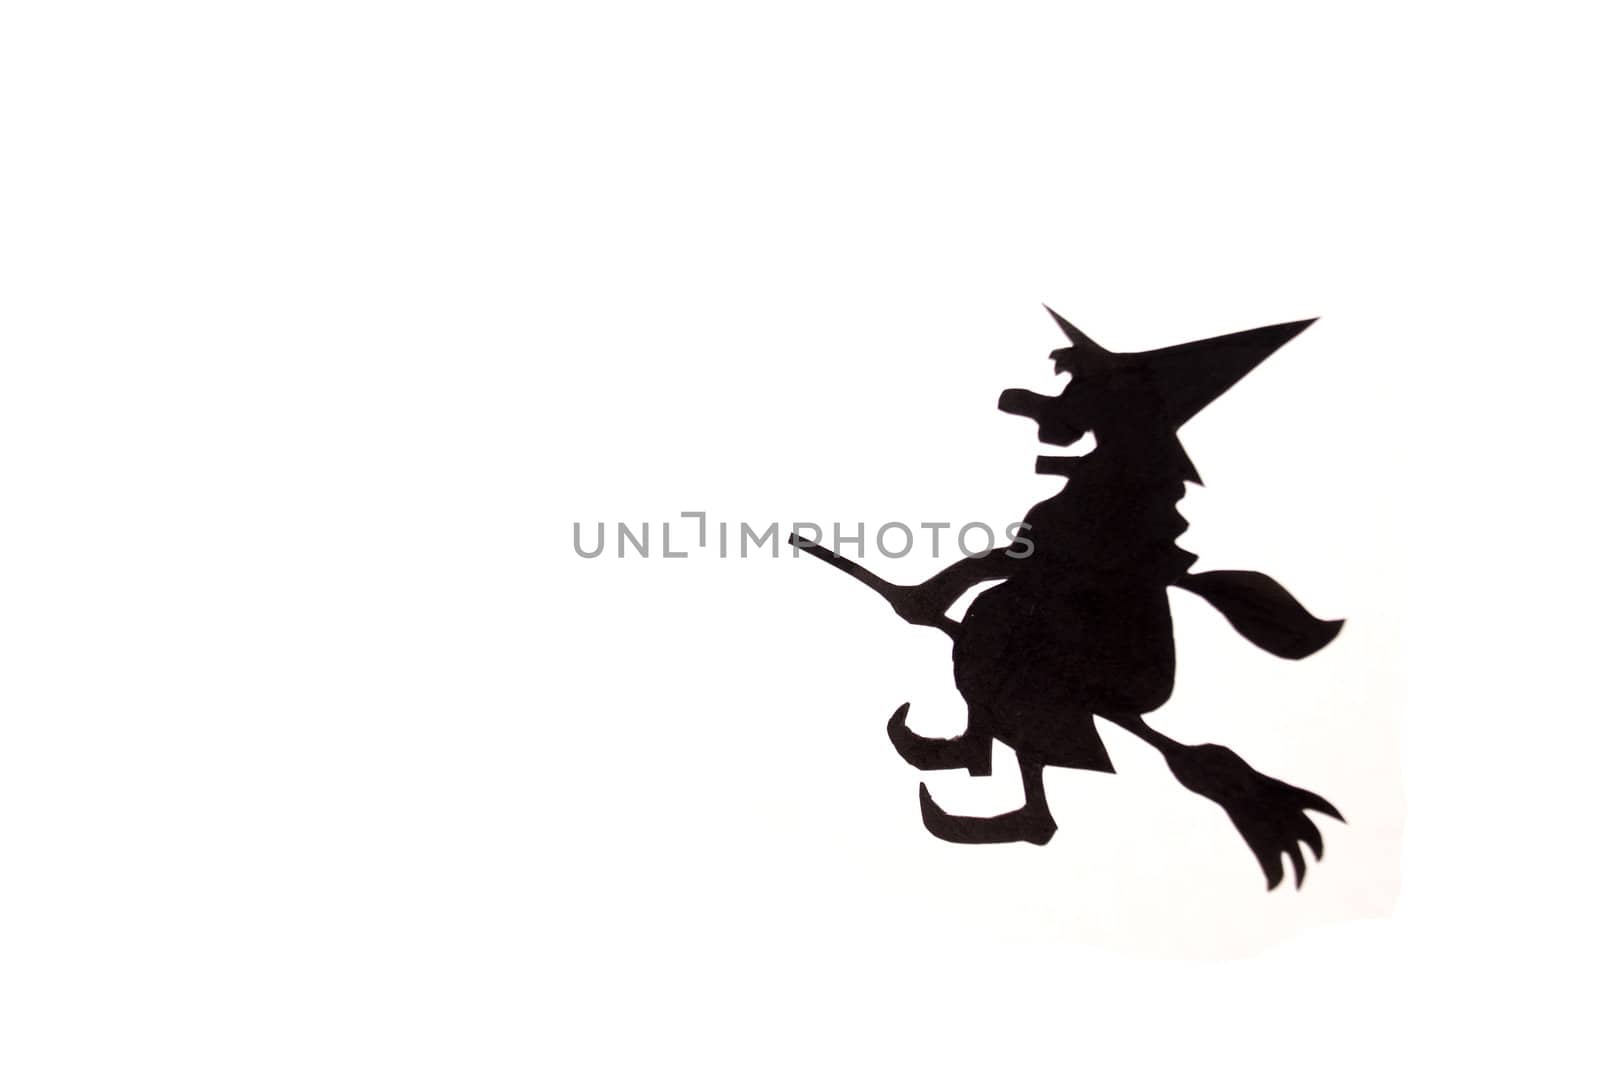 Witch,flying on broom on house,on white background
